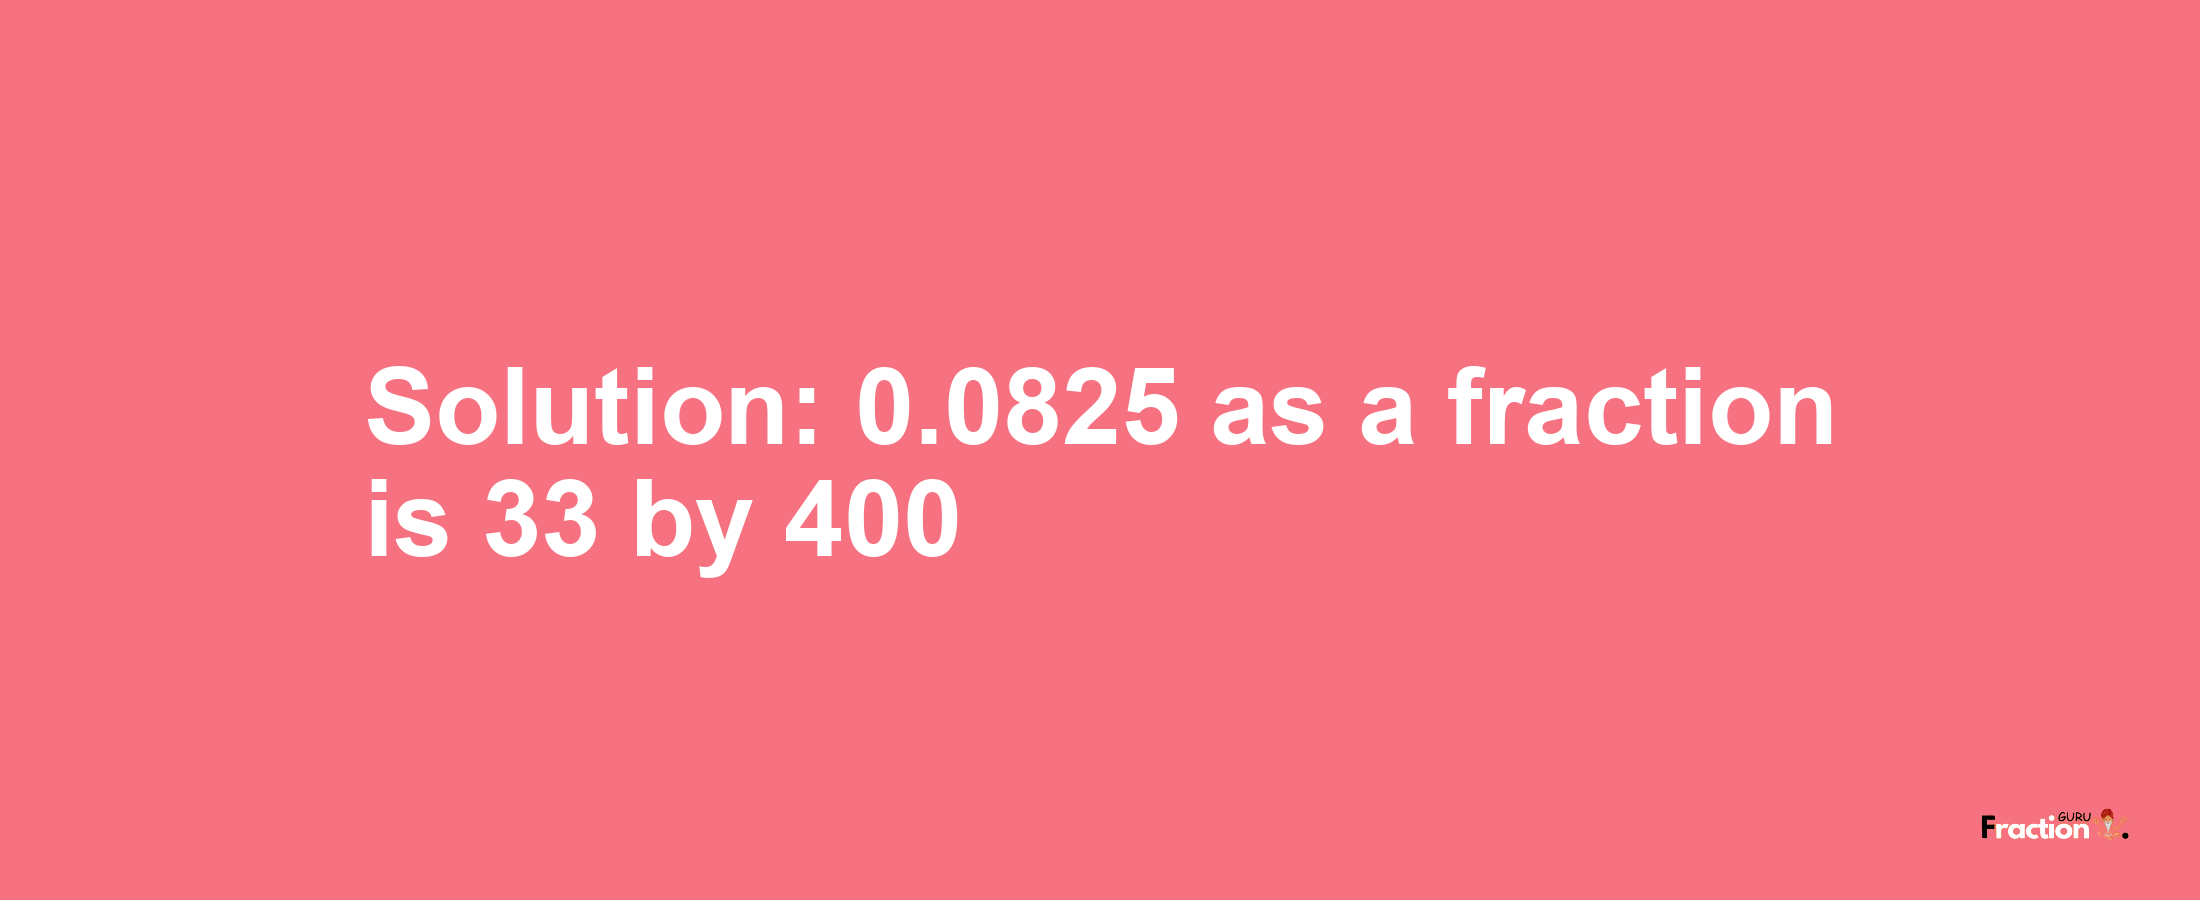 Solution:0.0825 as a fraction is 33/400